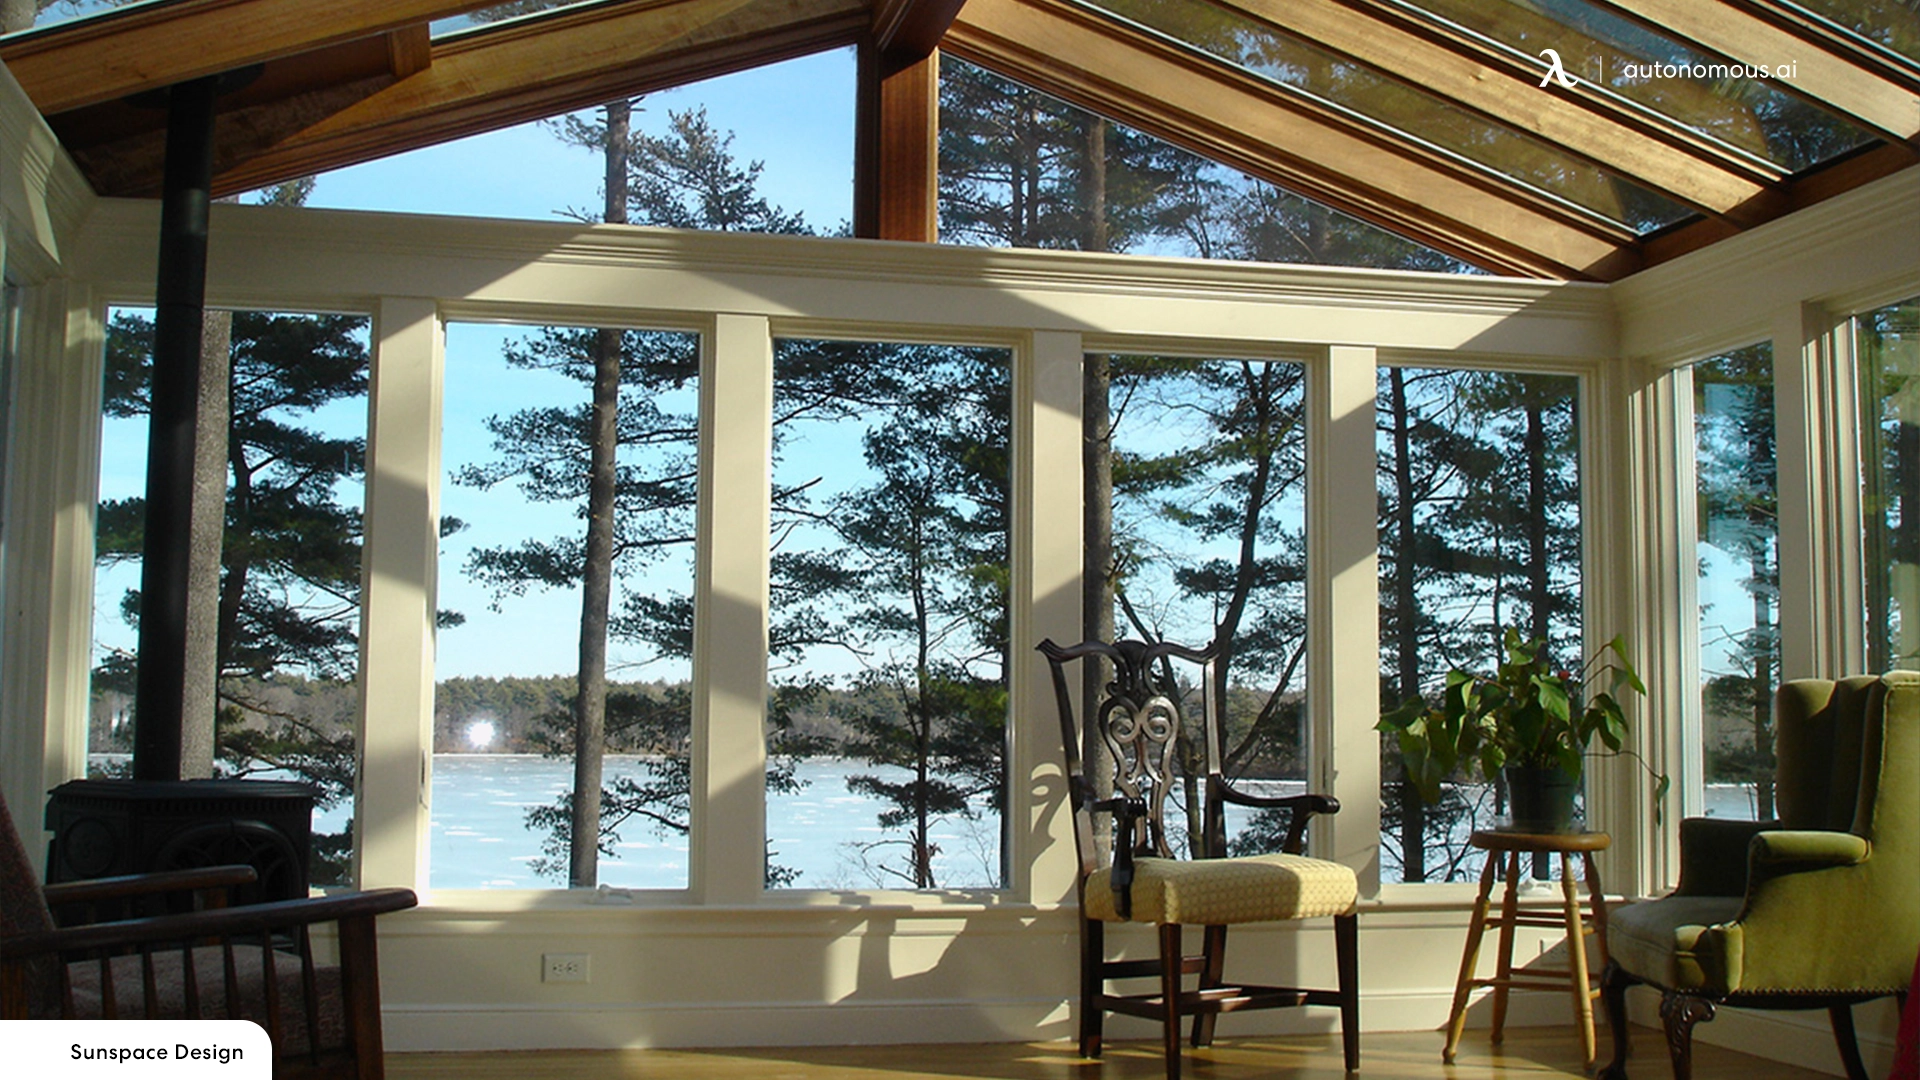 What Are the Benefits of a Prefab Sunroom?